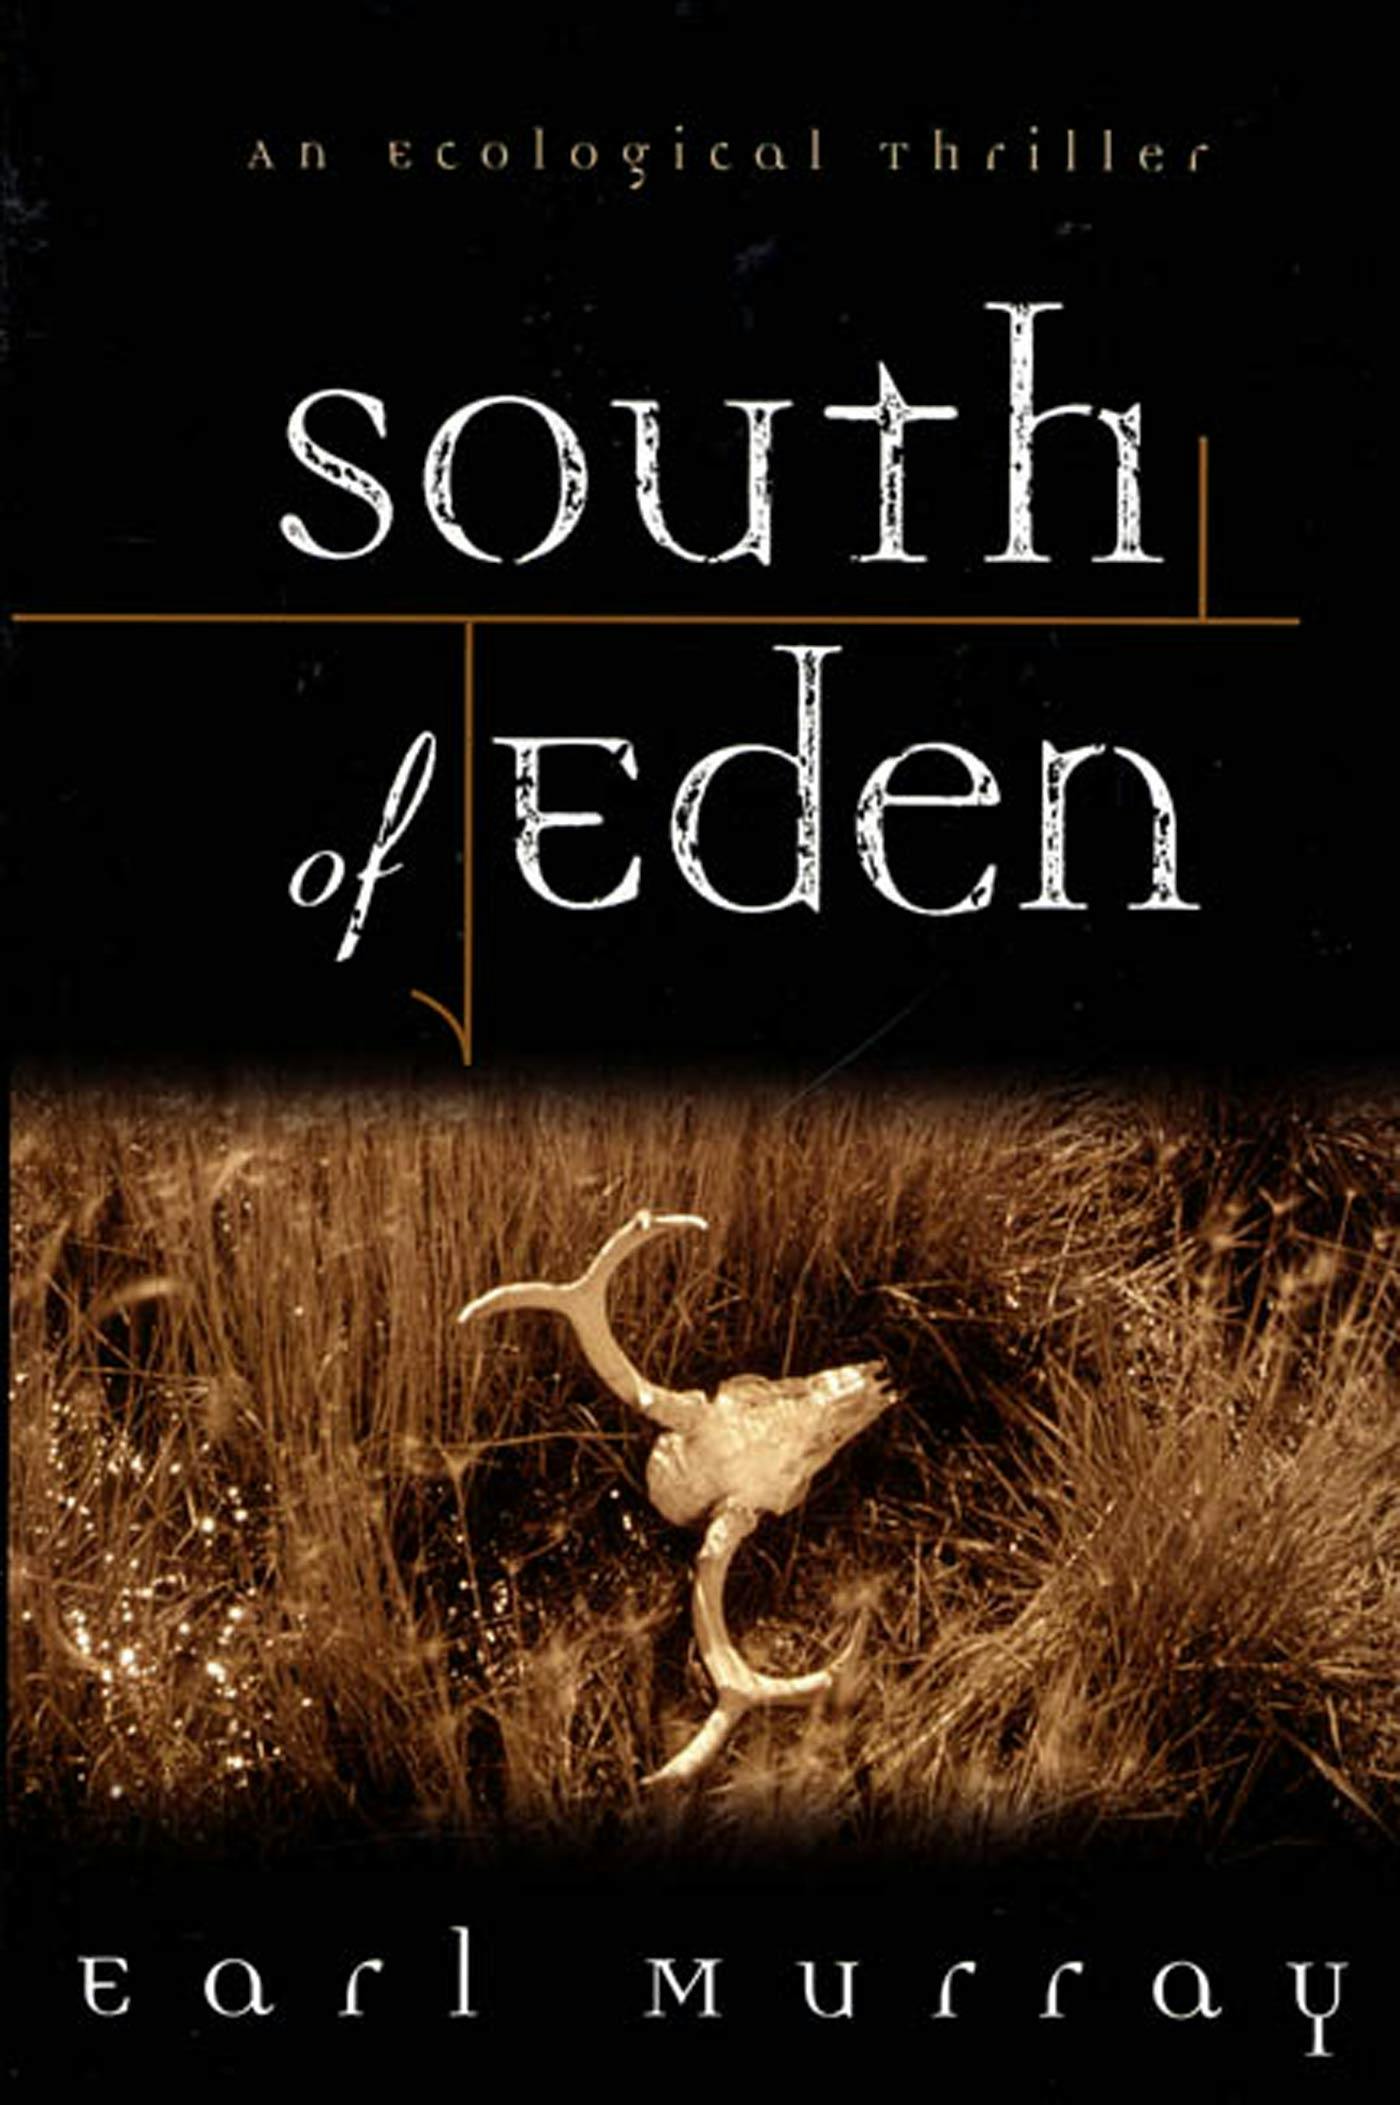 Cover for the book titled as: South of Eden